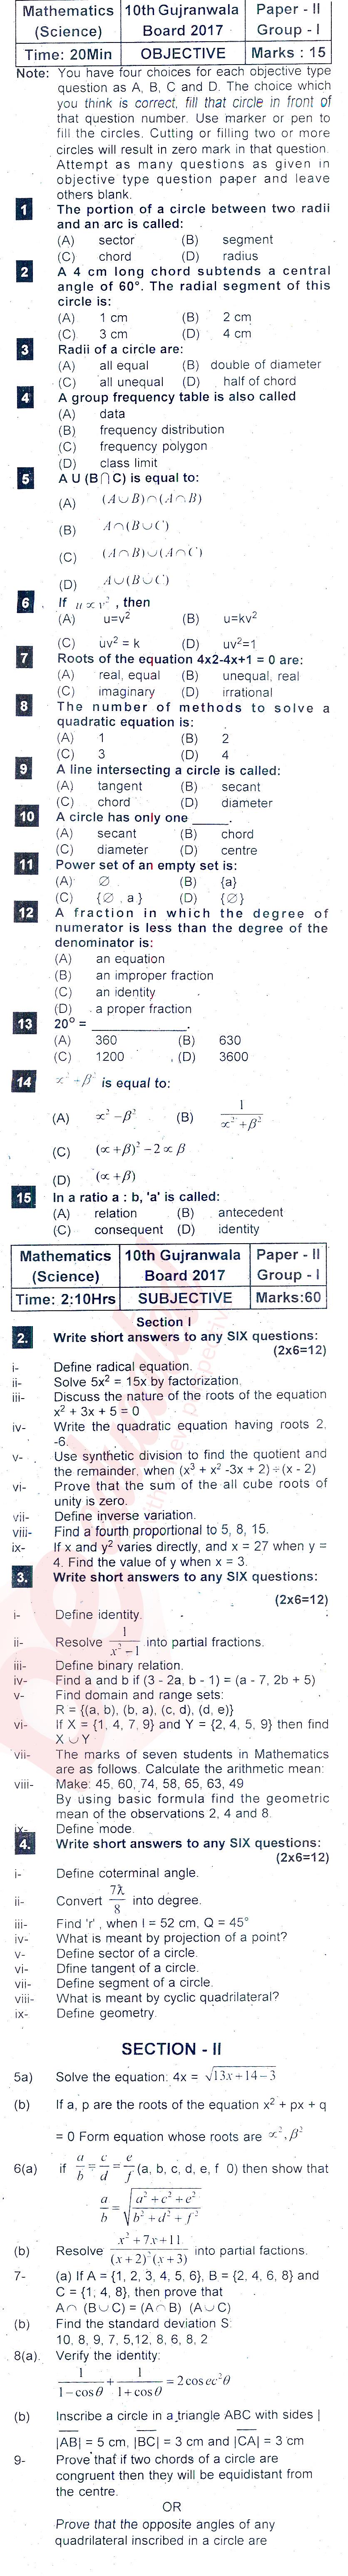 Math 10th class Past Paper Group 1 BISE Gujranwala 2017